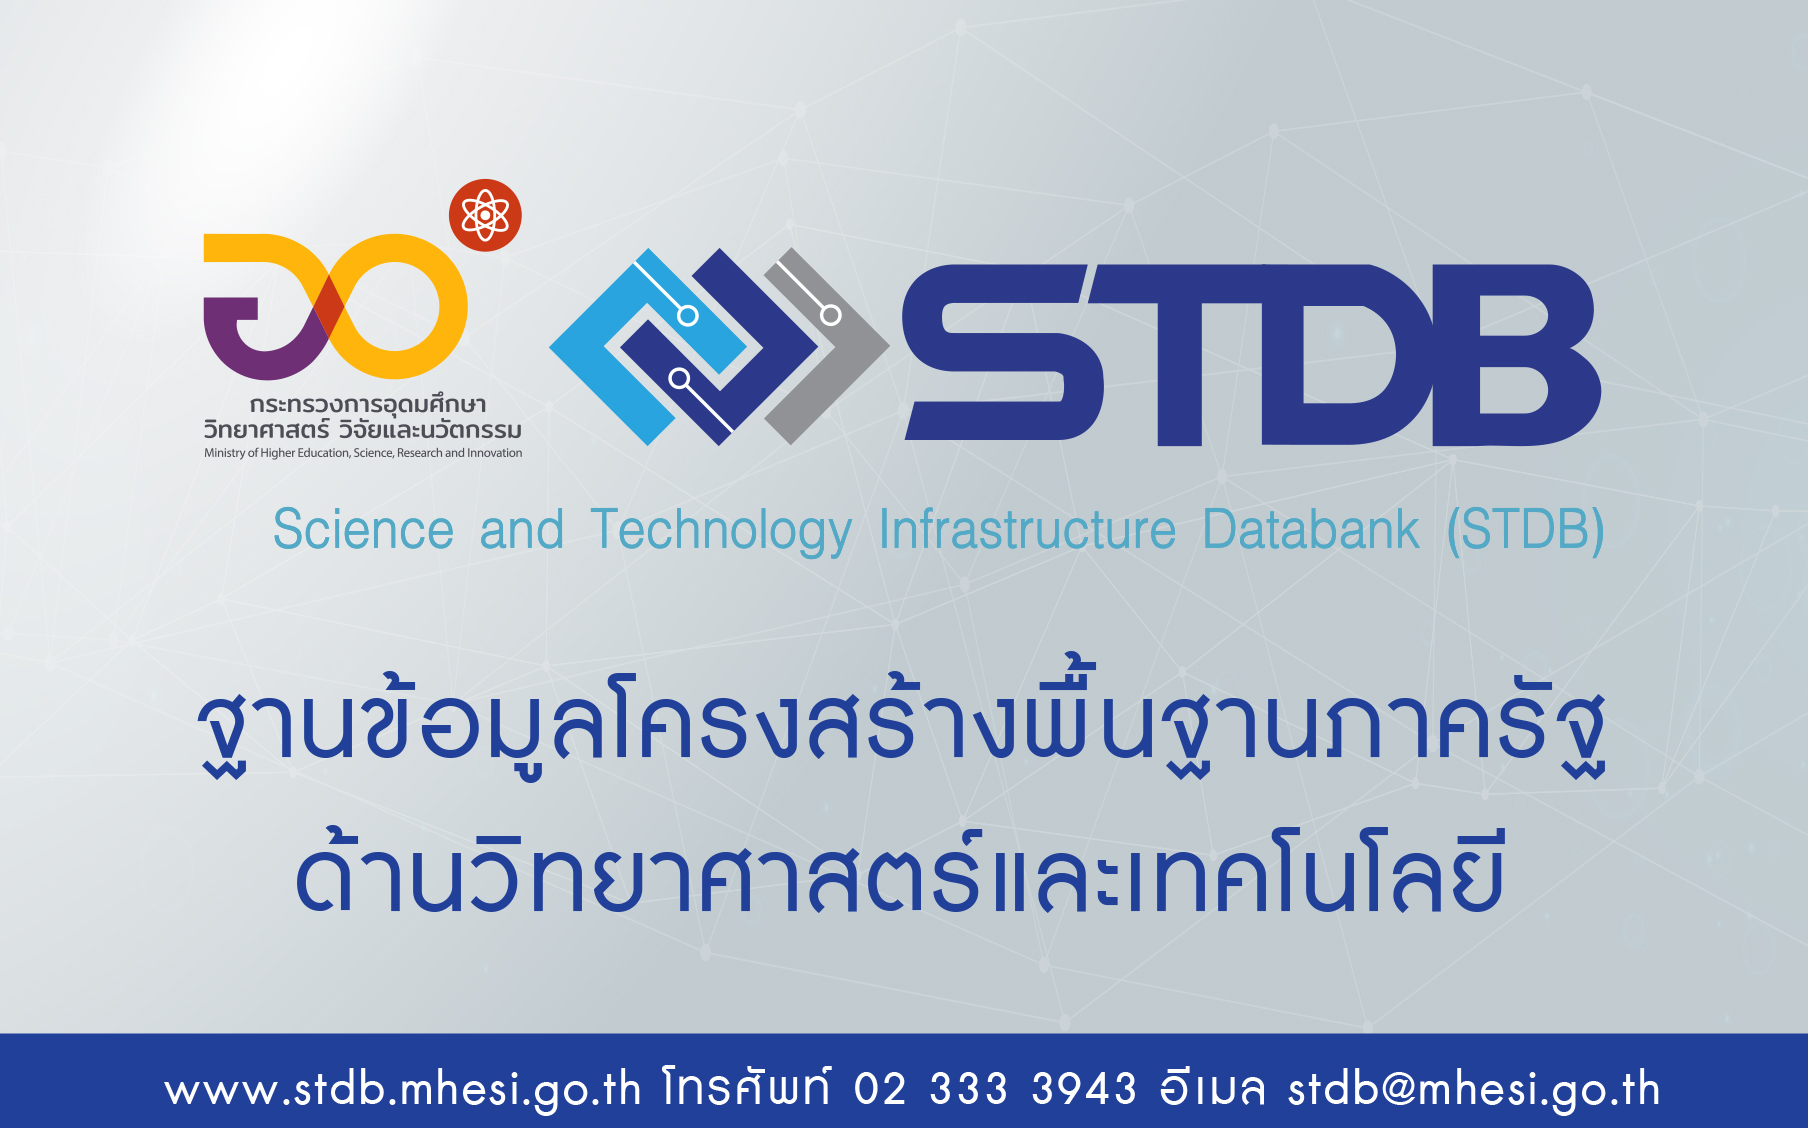 Science and Technology Infrastructure Databank (STDB)